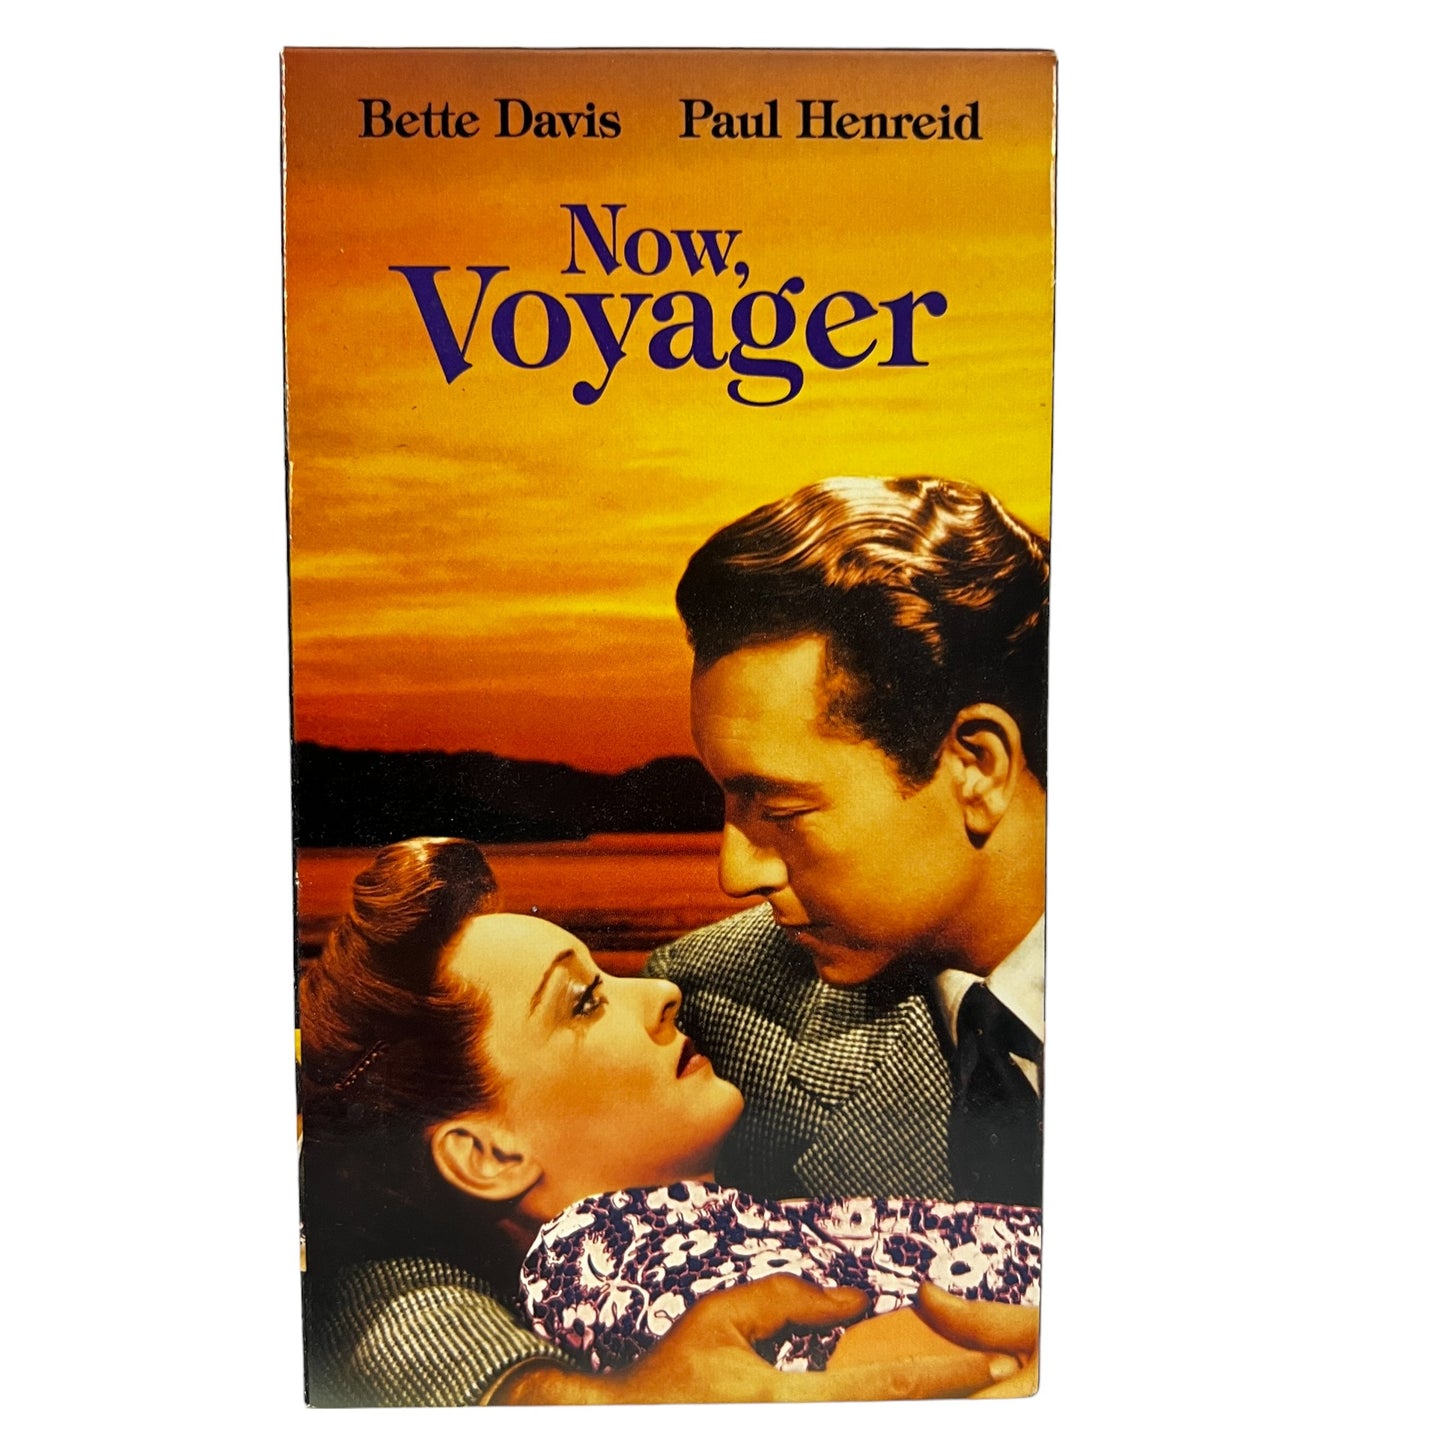 Now, Voyager DVD